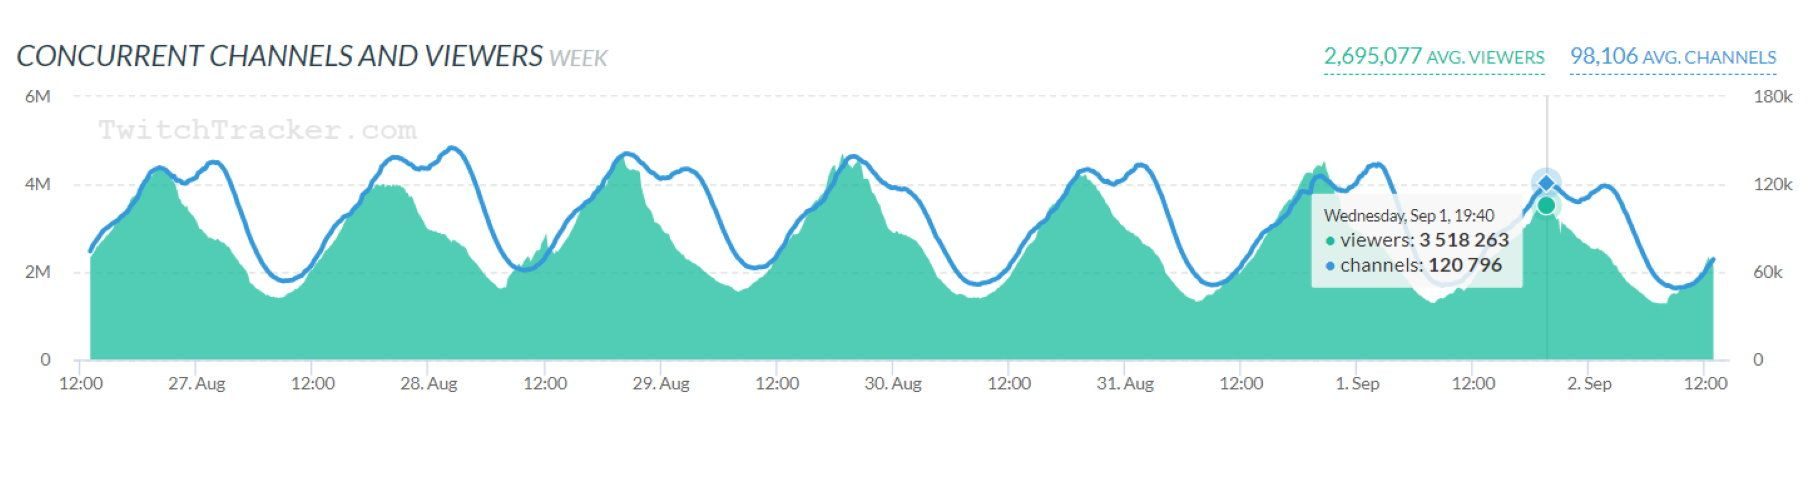 concurrent-viewers-via-twitchtracker-2672479